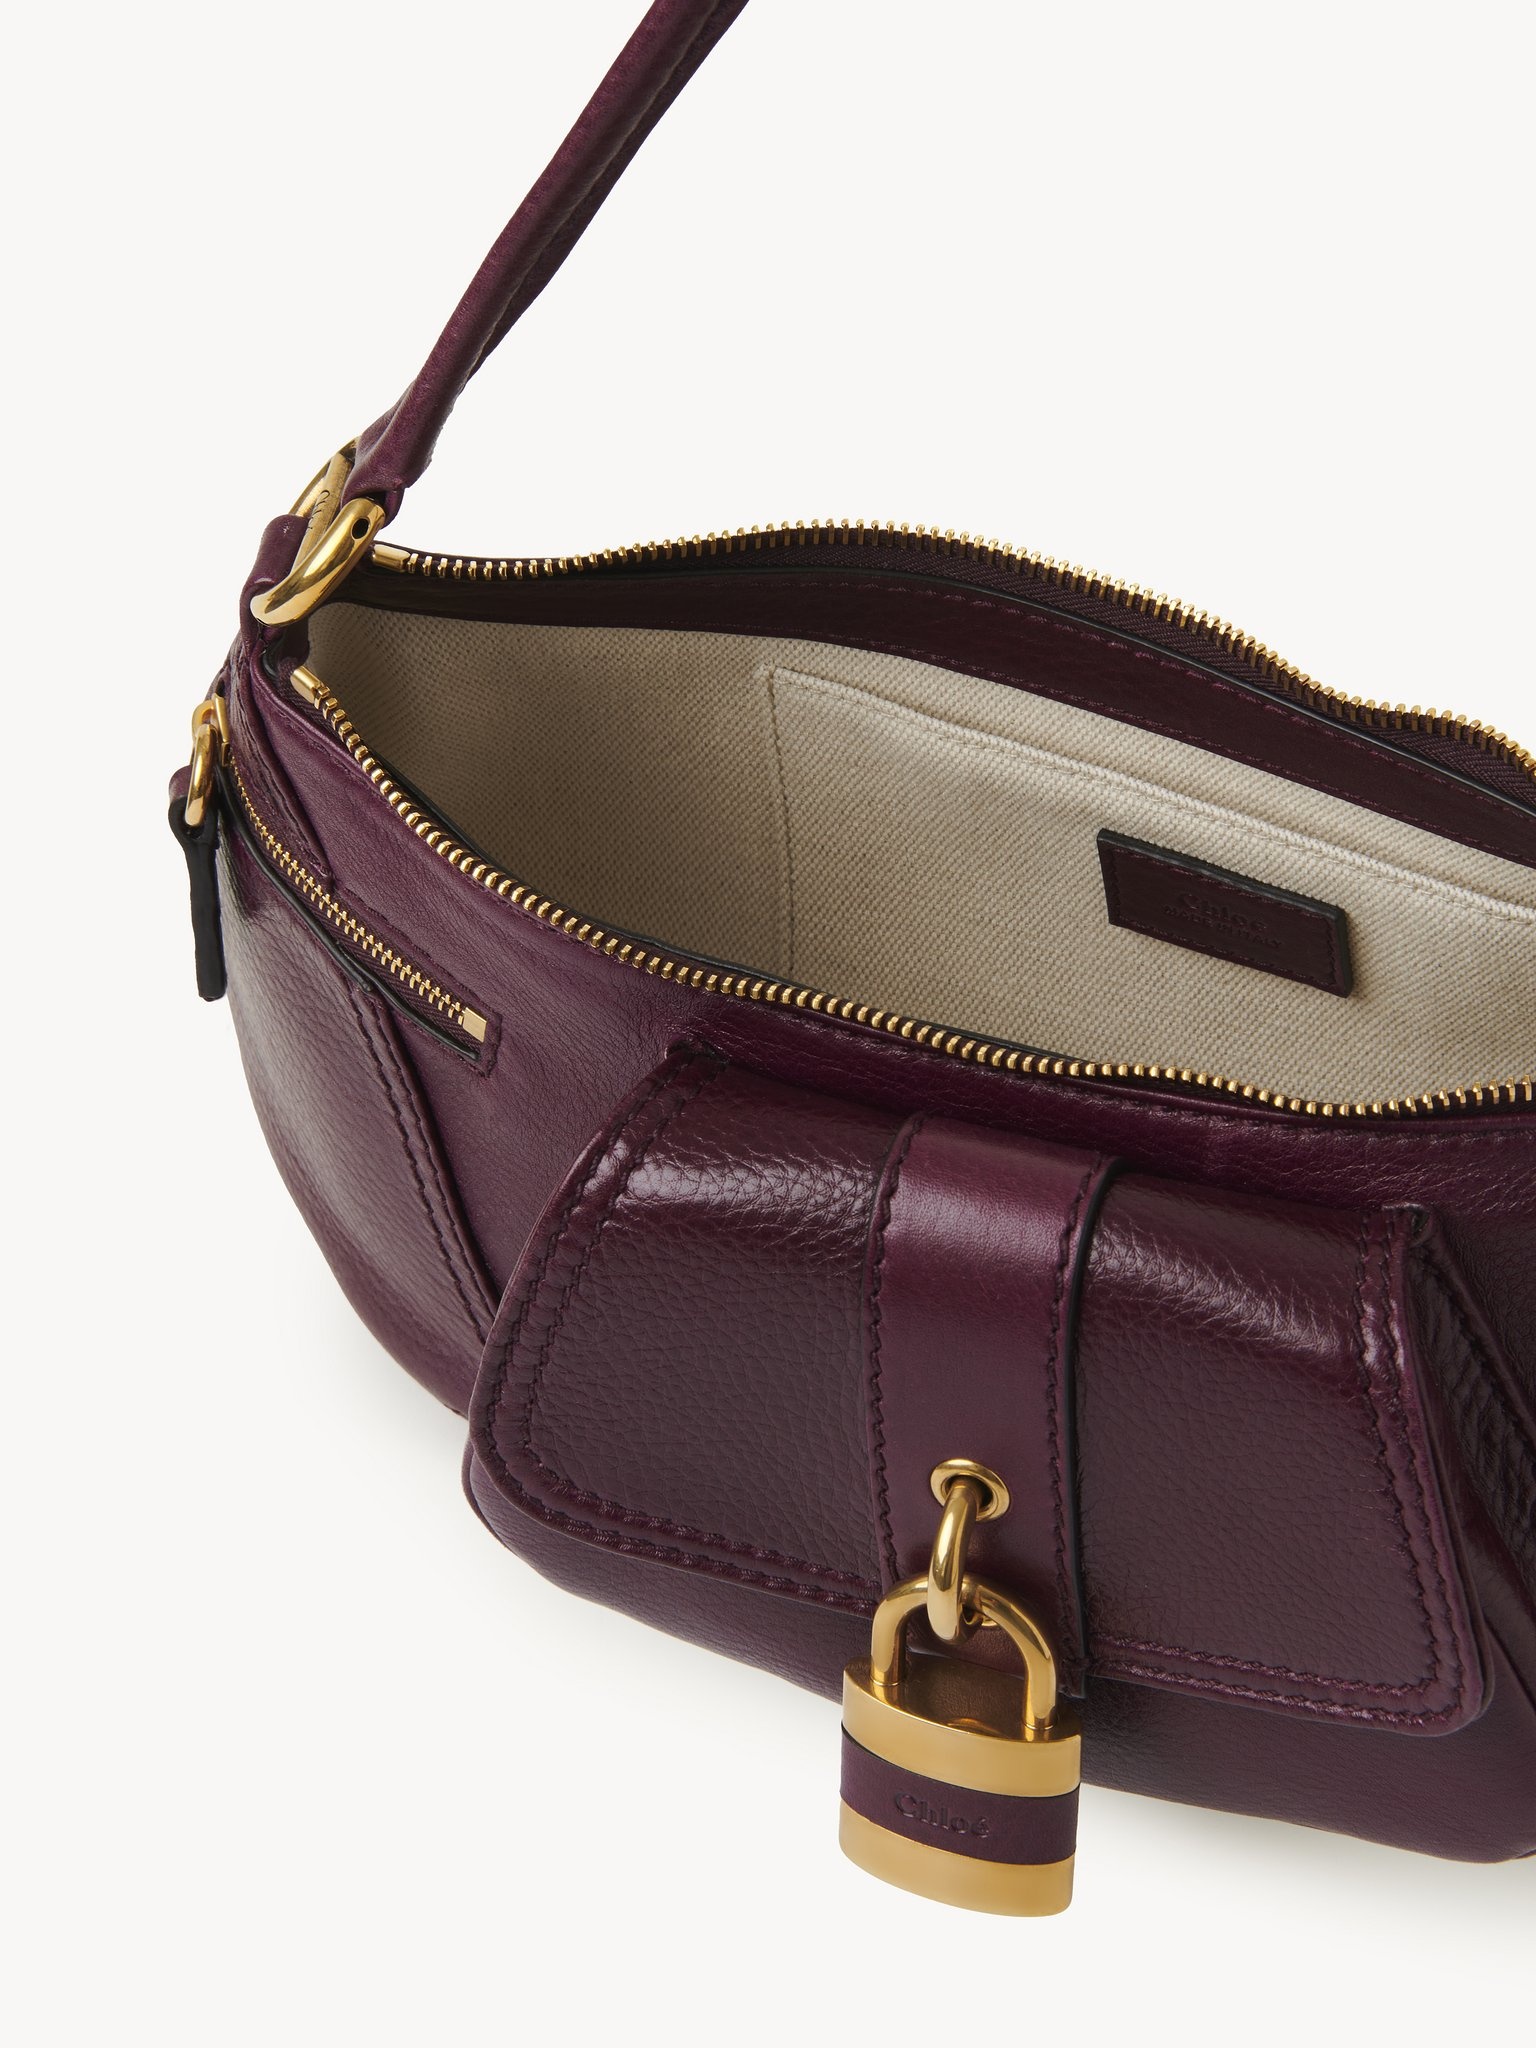 THE 99 SHOULDER BAG IN GRAINED LEATHER - 5